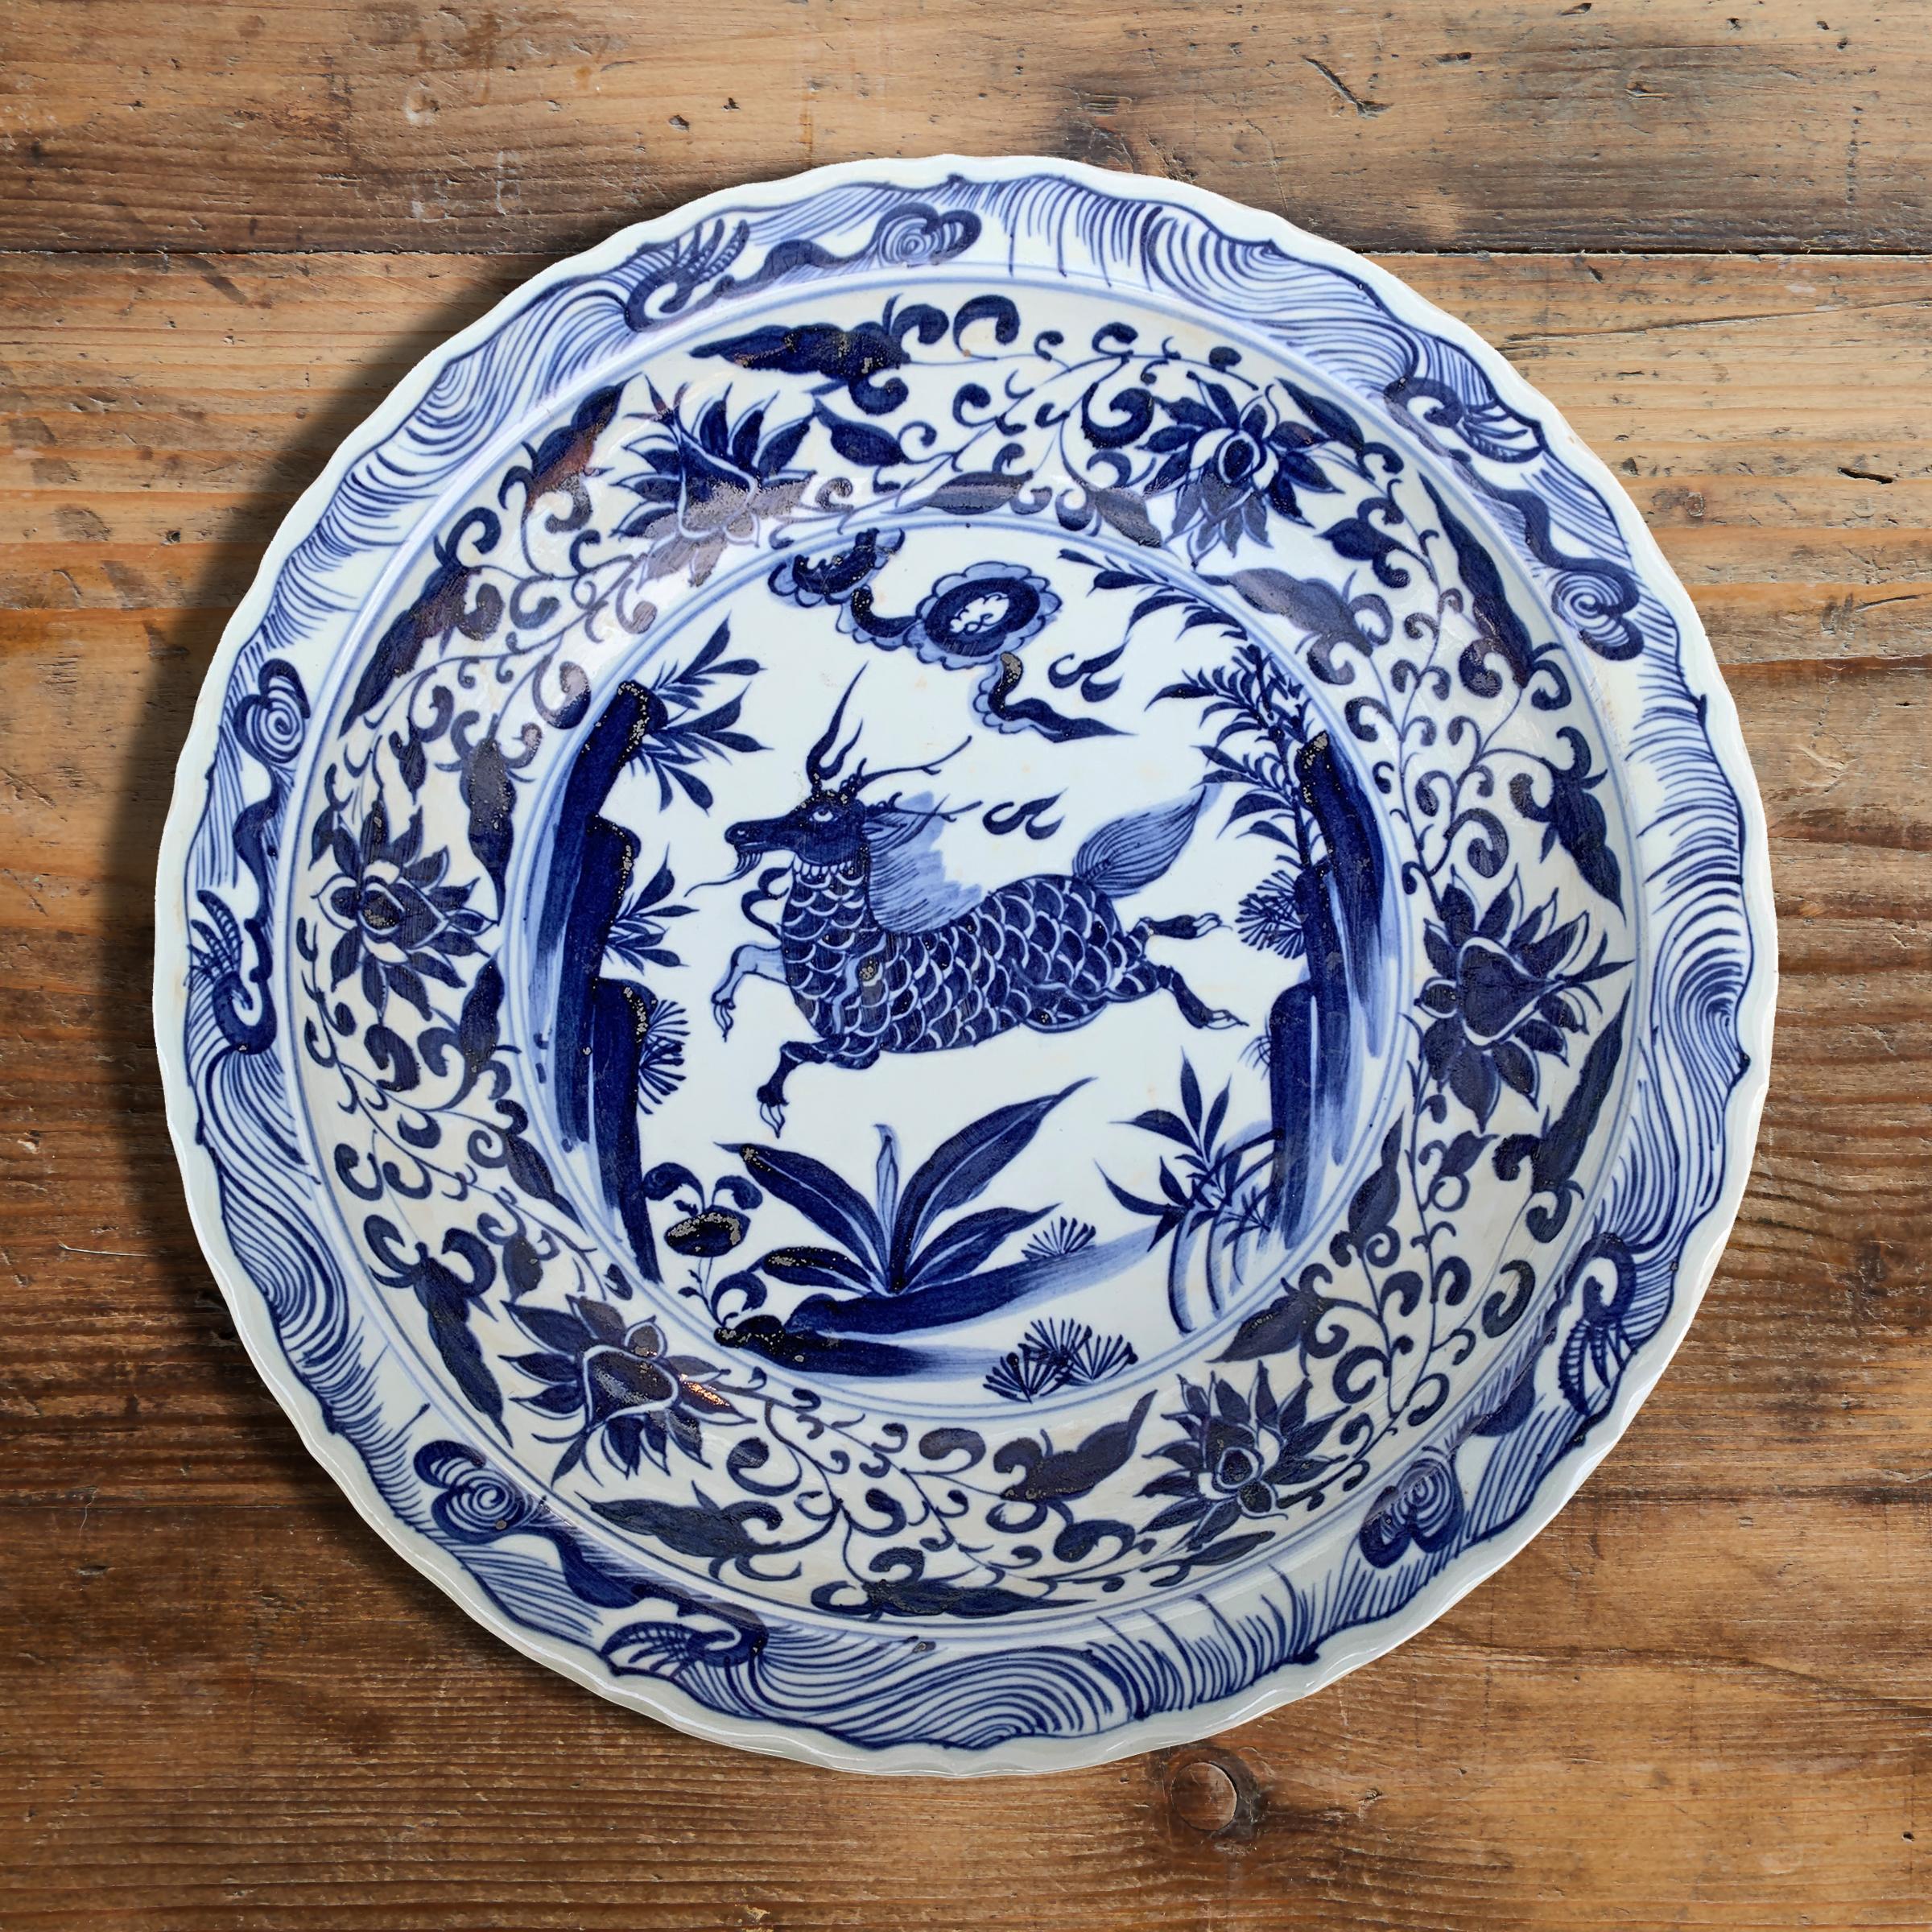 A whimsical large late-20th century Chinese blue and white painted porcelain platter depicting a leaping Qilin, a mythical creature with the body of the dragon, the legs and head of a deer, and the tail of a lion, amidst a landscape of rocks and